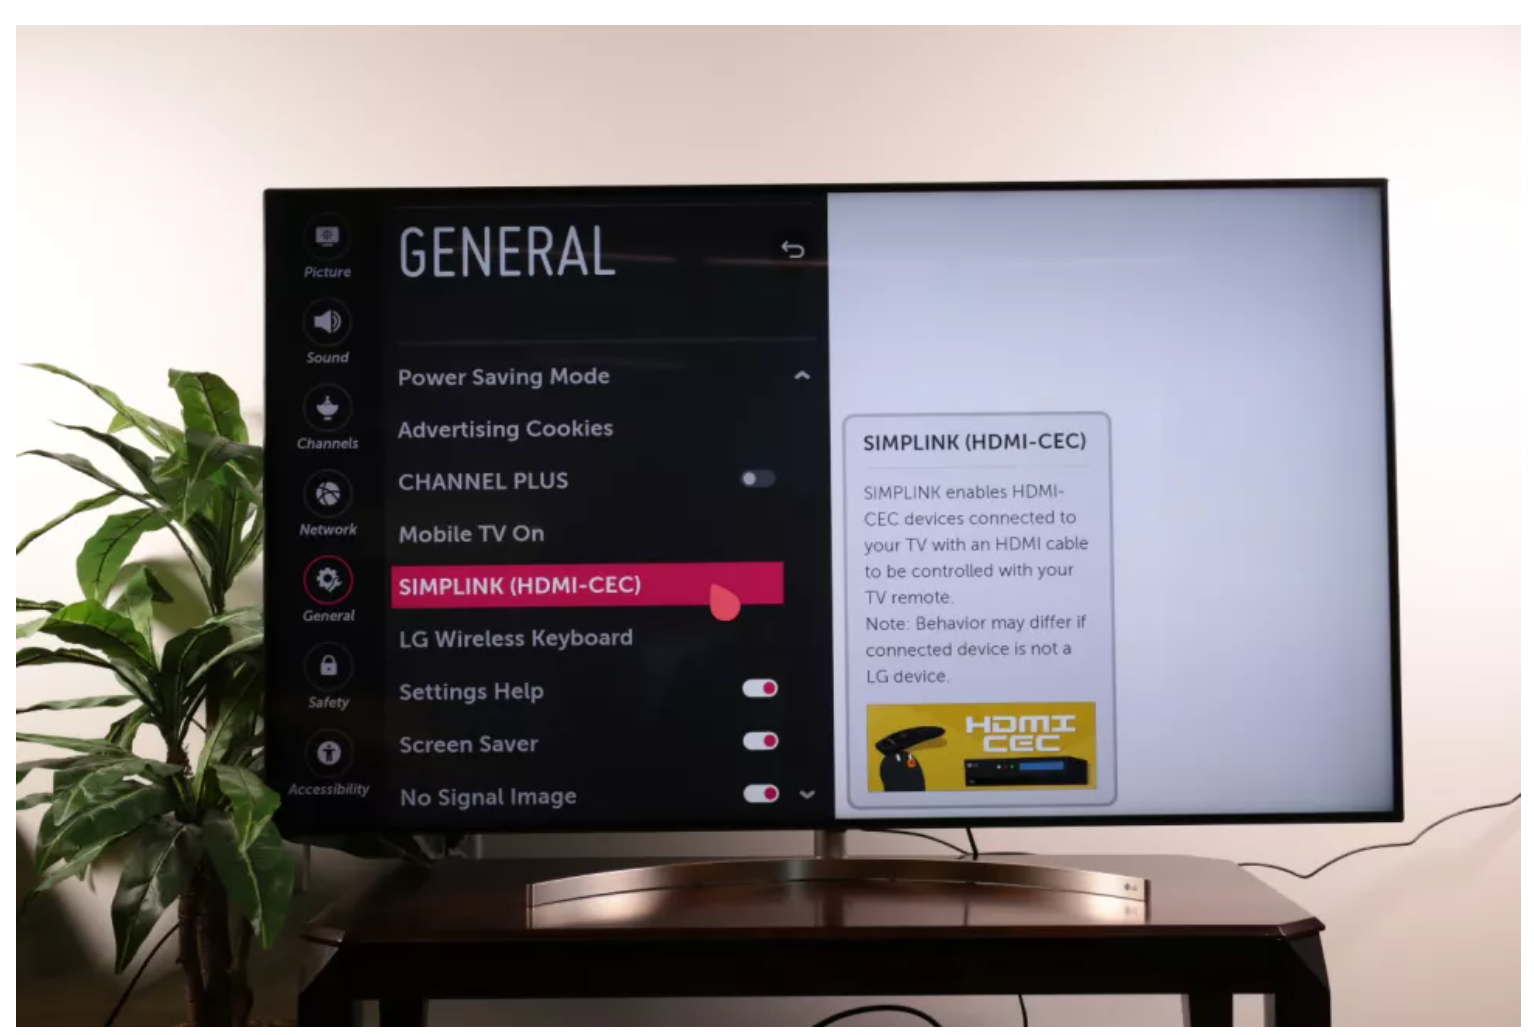 How to Use SimpLink on an LG TV